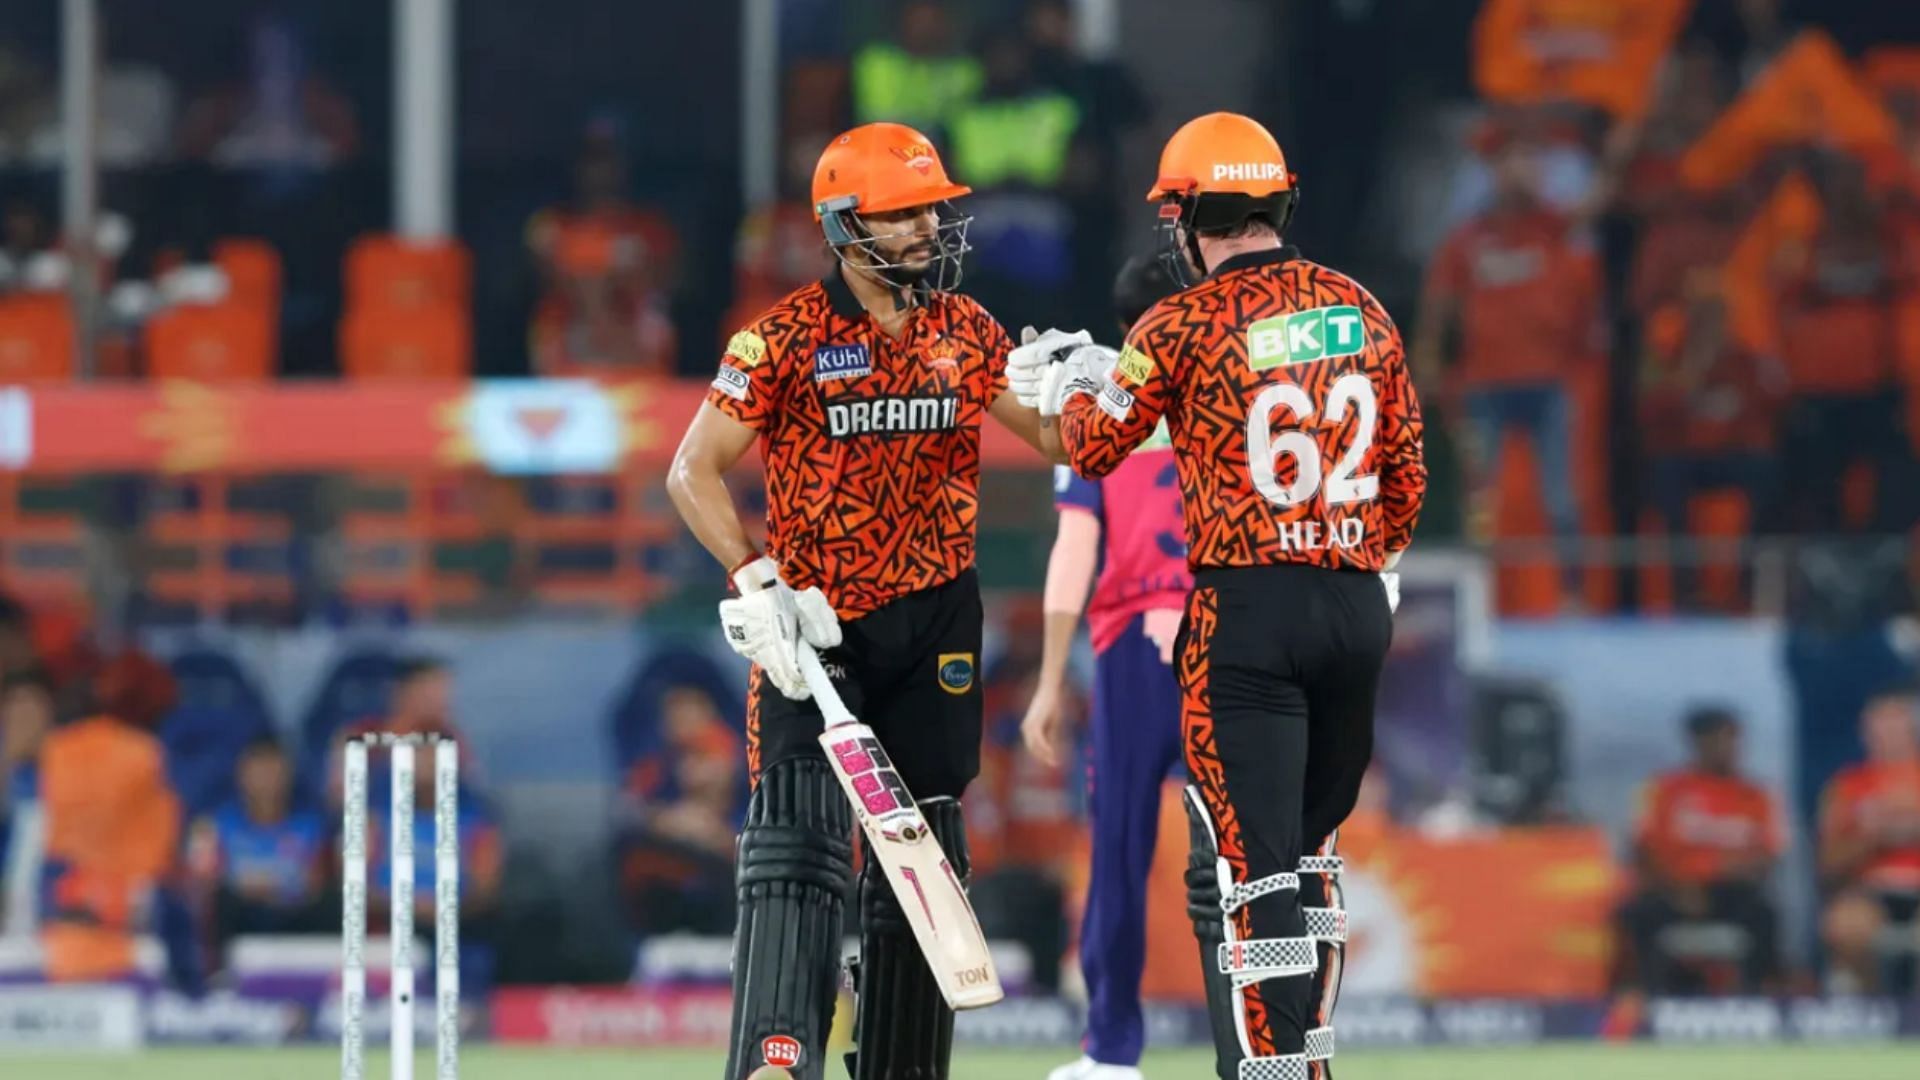 SRH secured a one-run victory over RR on Thursday (Image: BCCI/IPL)